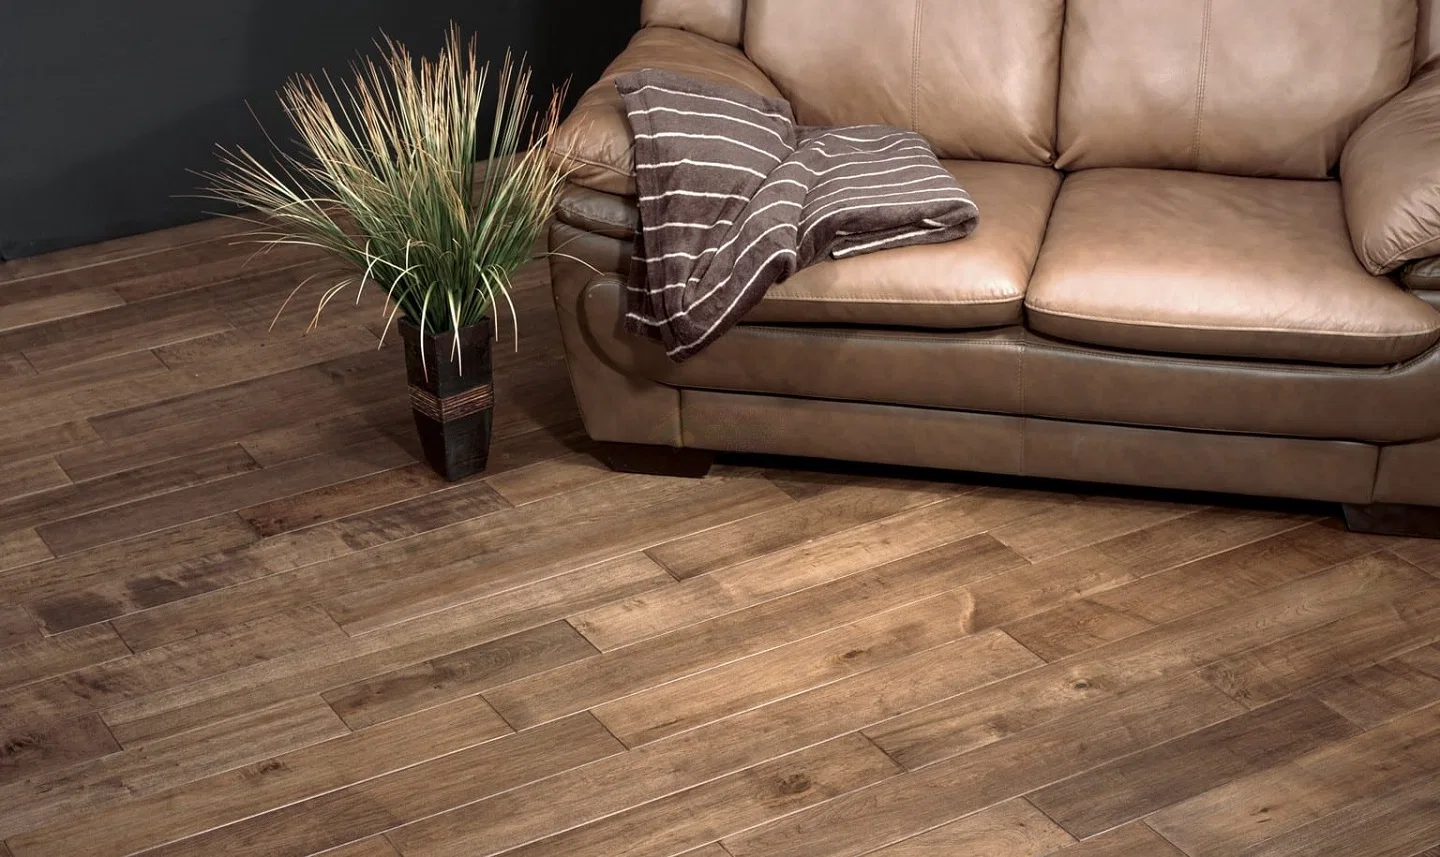 How much does maple flooring cost?